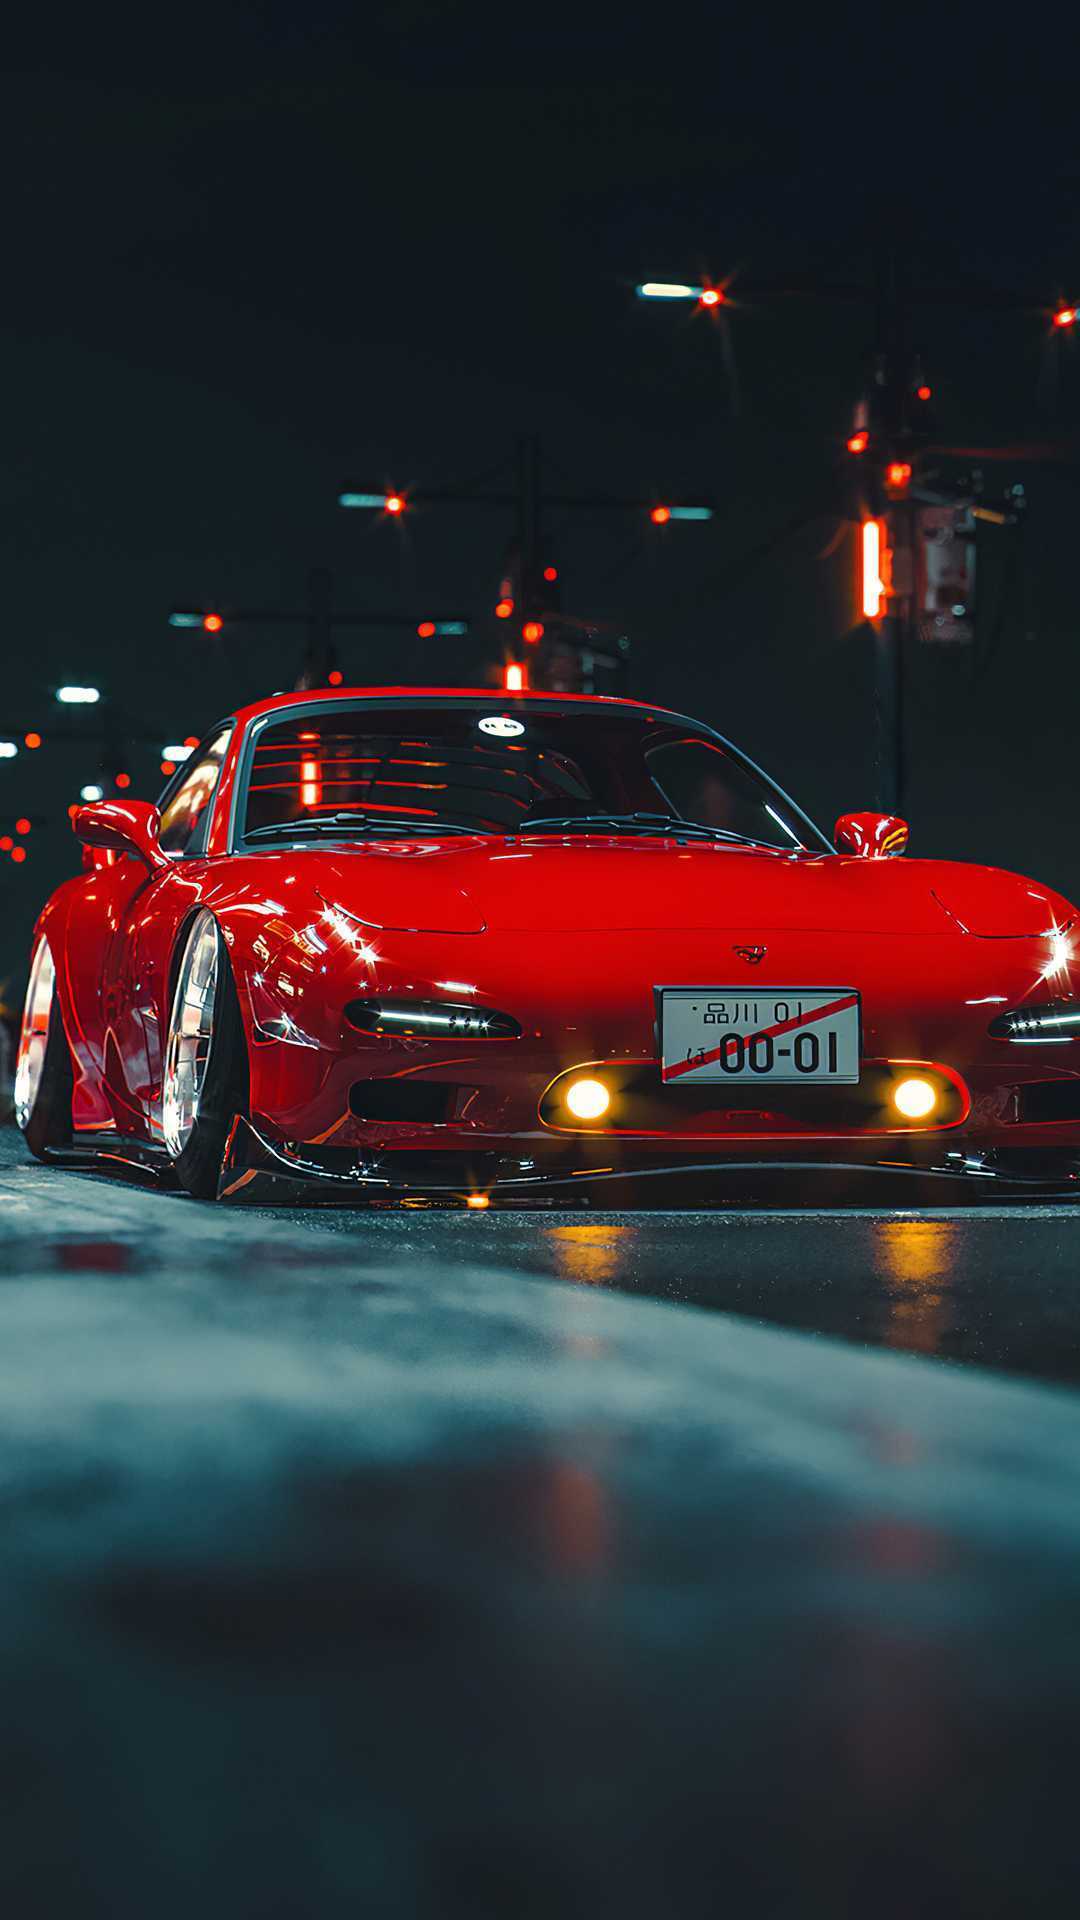 A red sports car driving down the street - JDM